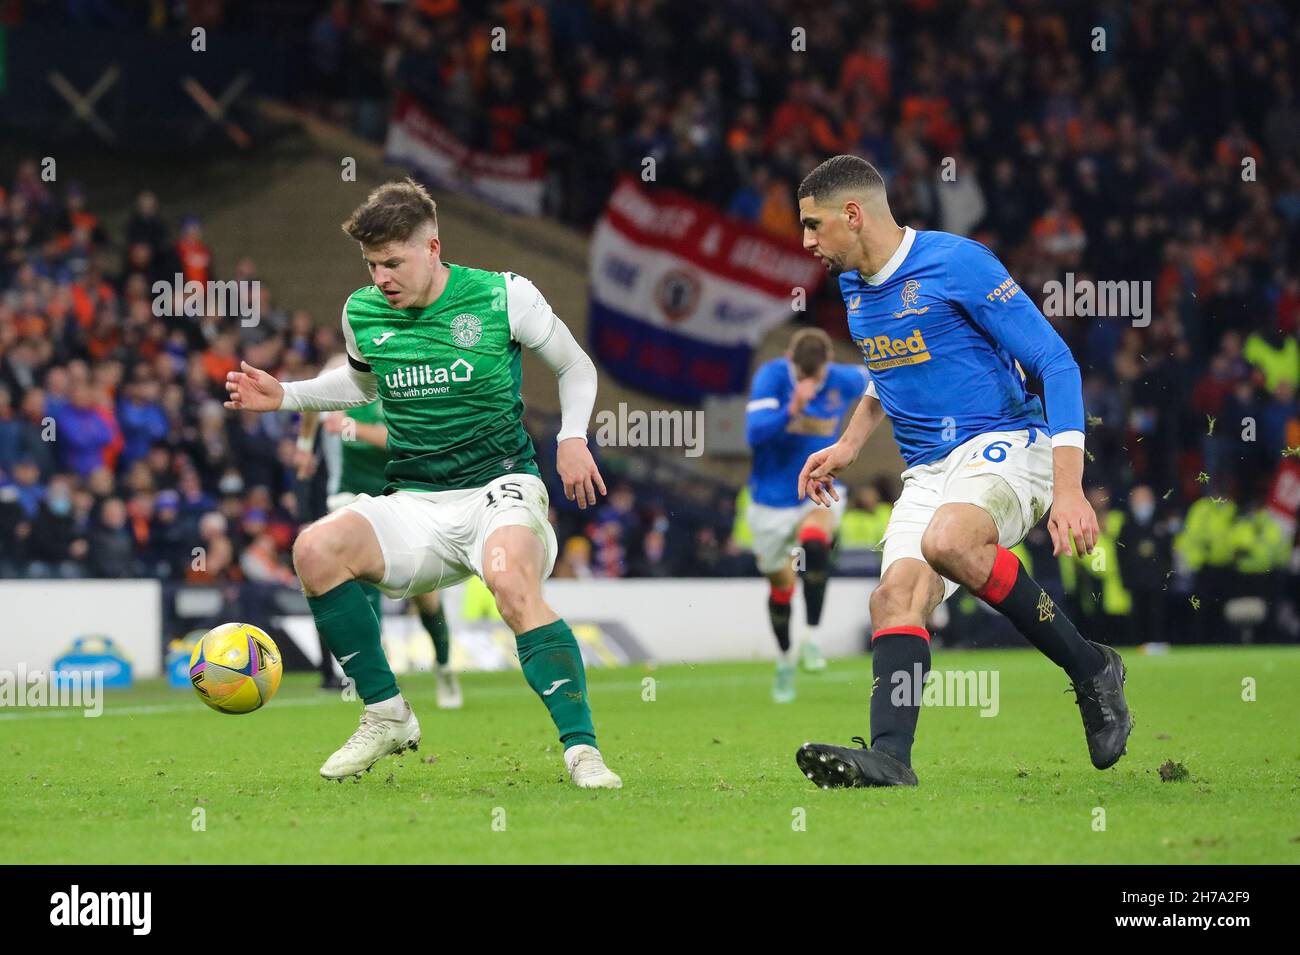 Glasgow, UK. 21st Nov, 2021. The semi final of the Premier Sports Cup took place between Rangers FC and Hibernian FC at Hampden Park stadium, Glasgow. The winner will go forward to play Celtic FC in the final on December 19th. Final score was Hibernian won by 3 goals to 1. Credit: Findlay/Alamy Live News Stock Photo